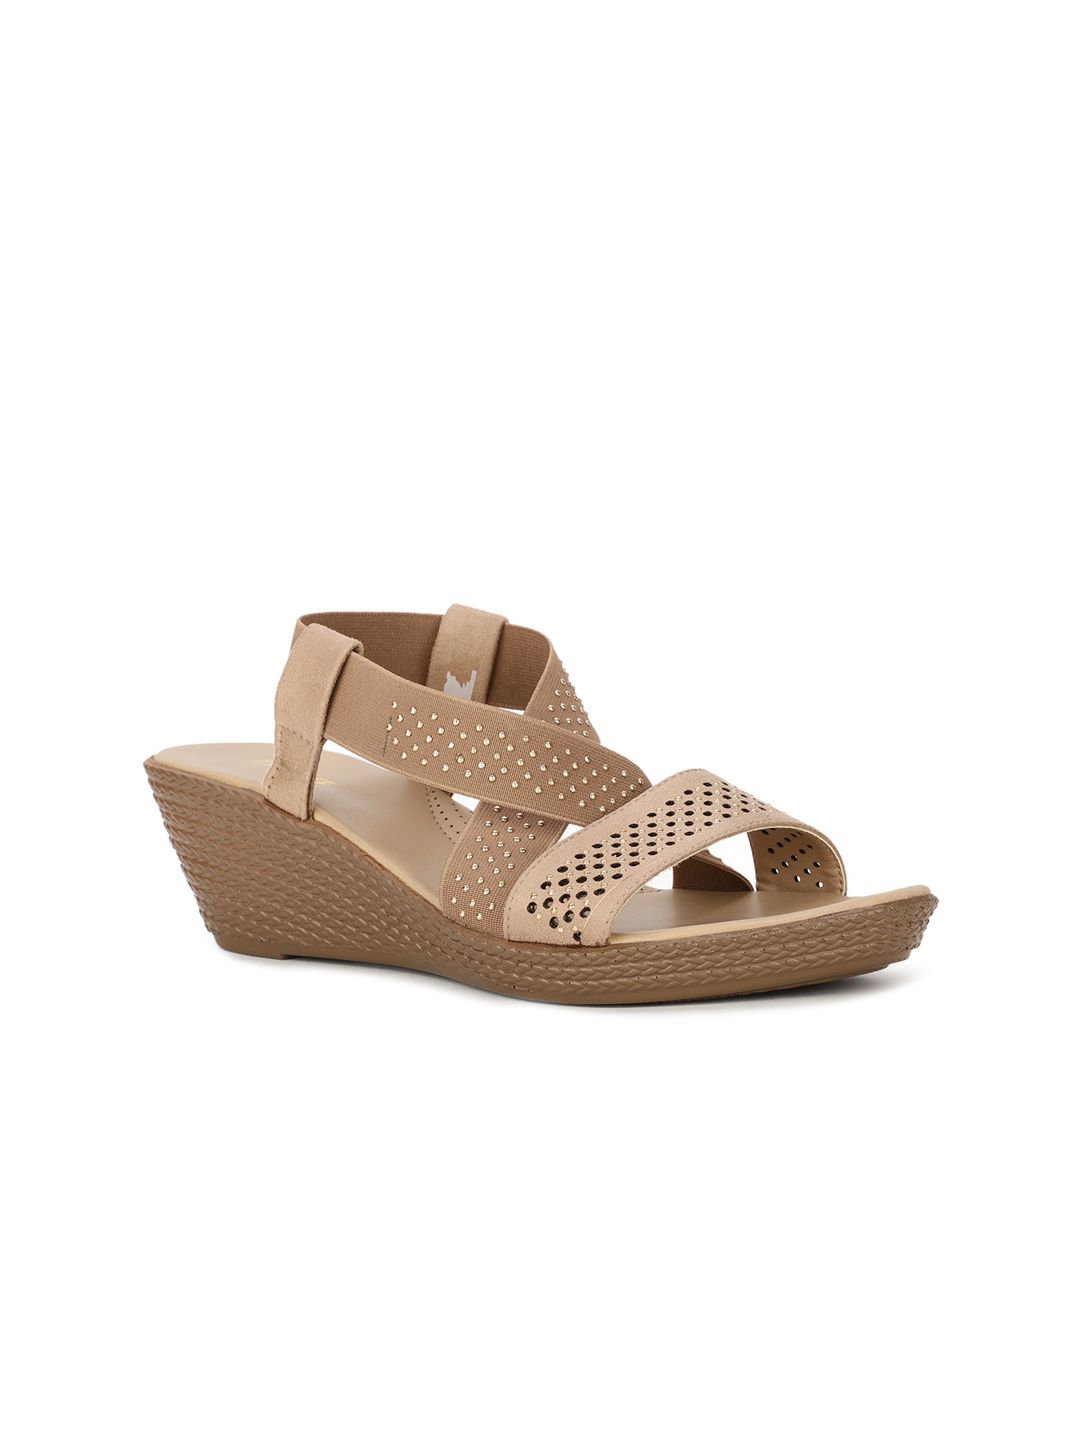 Bata Beige Textured PU Wedge Sandals with Laser Cuts Price in India